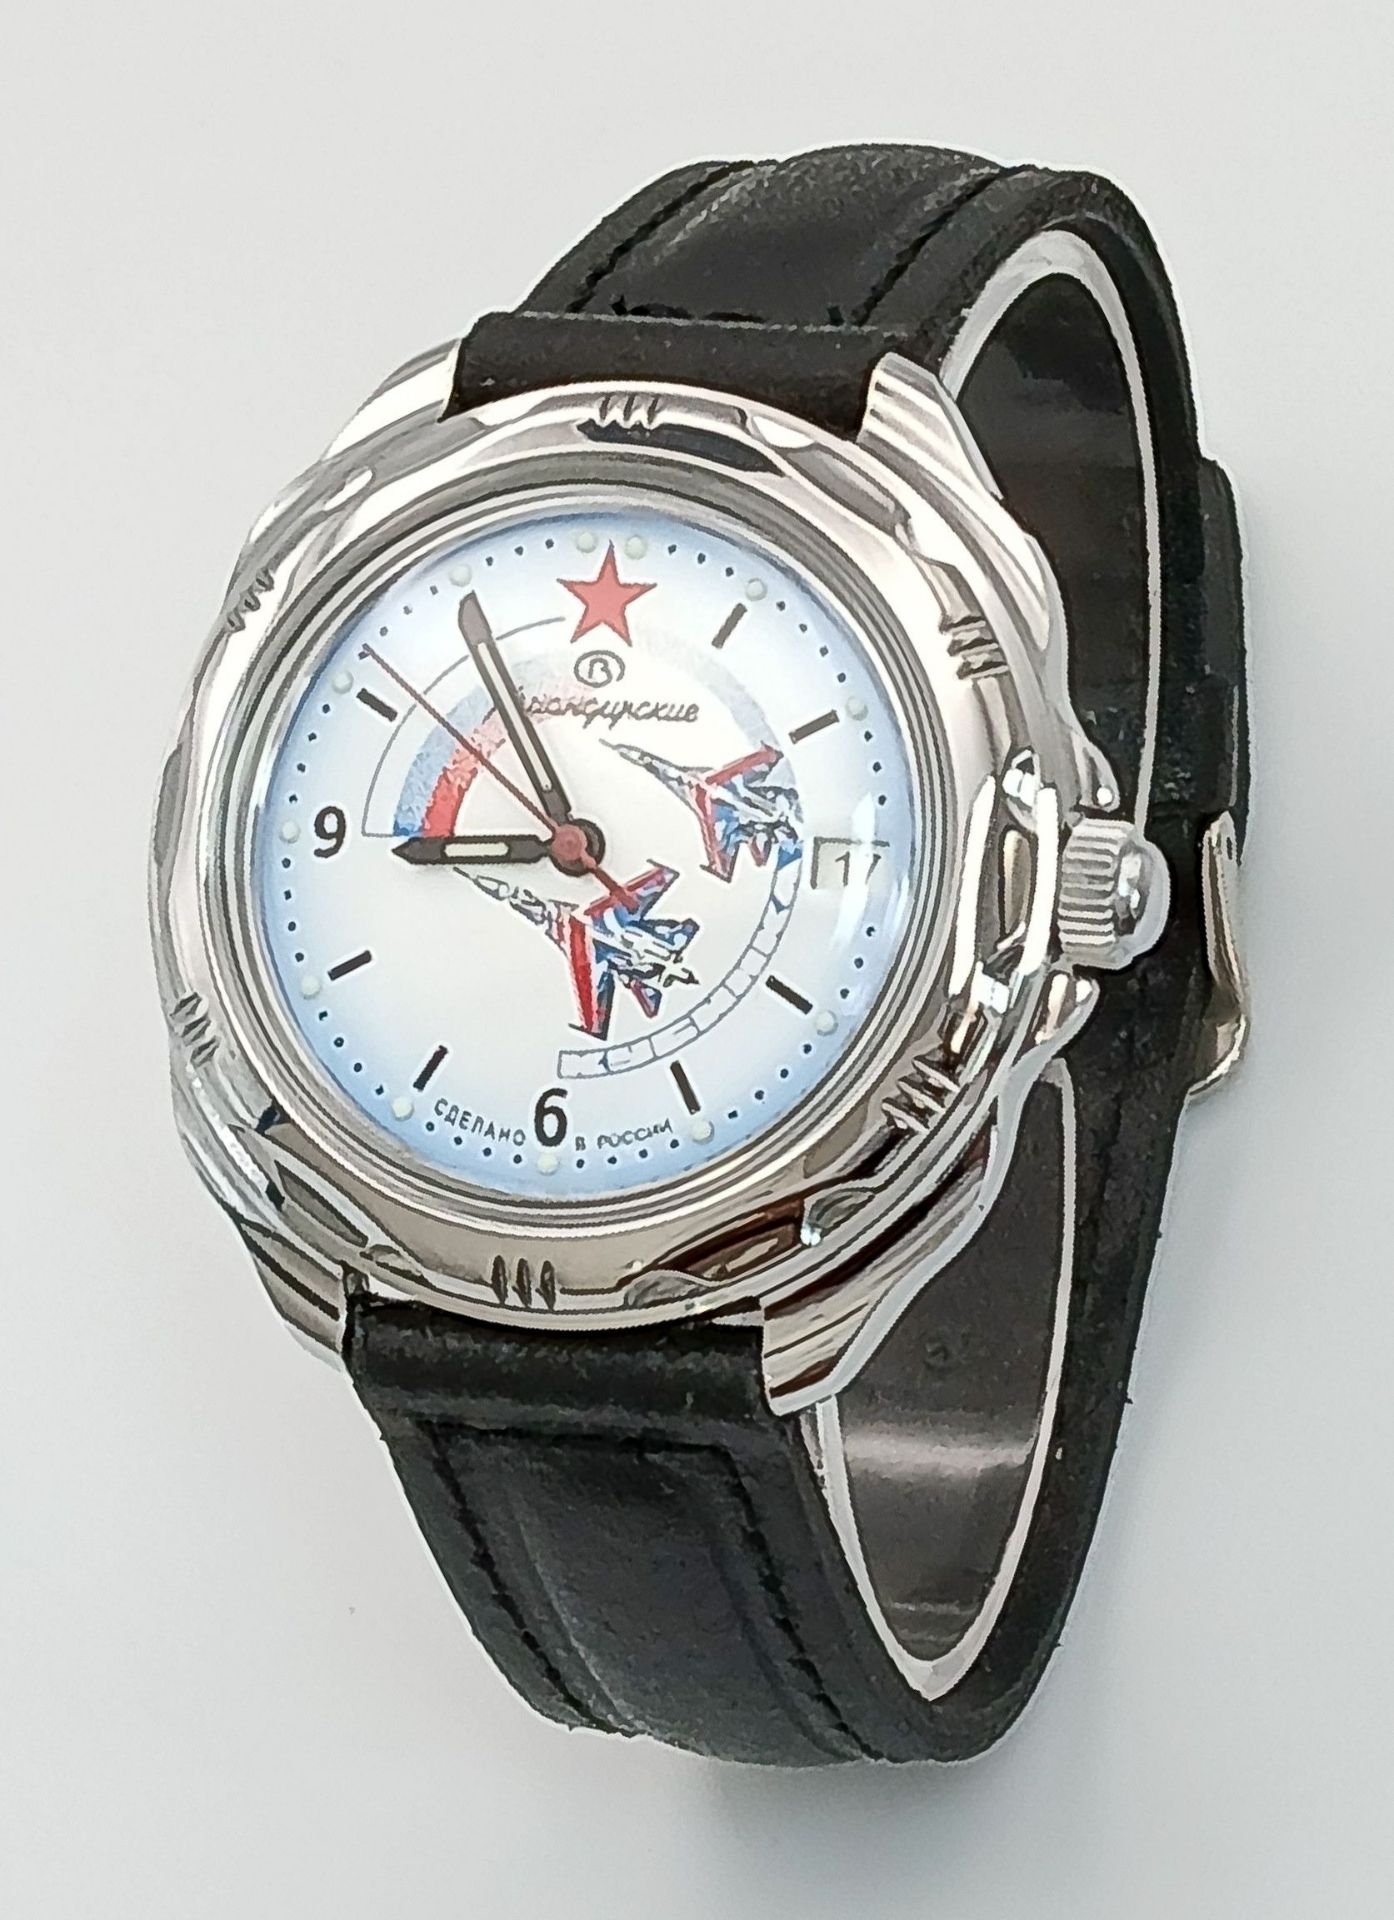 A Vostok Manual Gents Watch. Black leather strap. Stainless steel case - 40mm. White dial with date